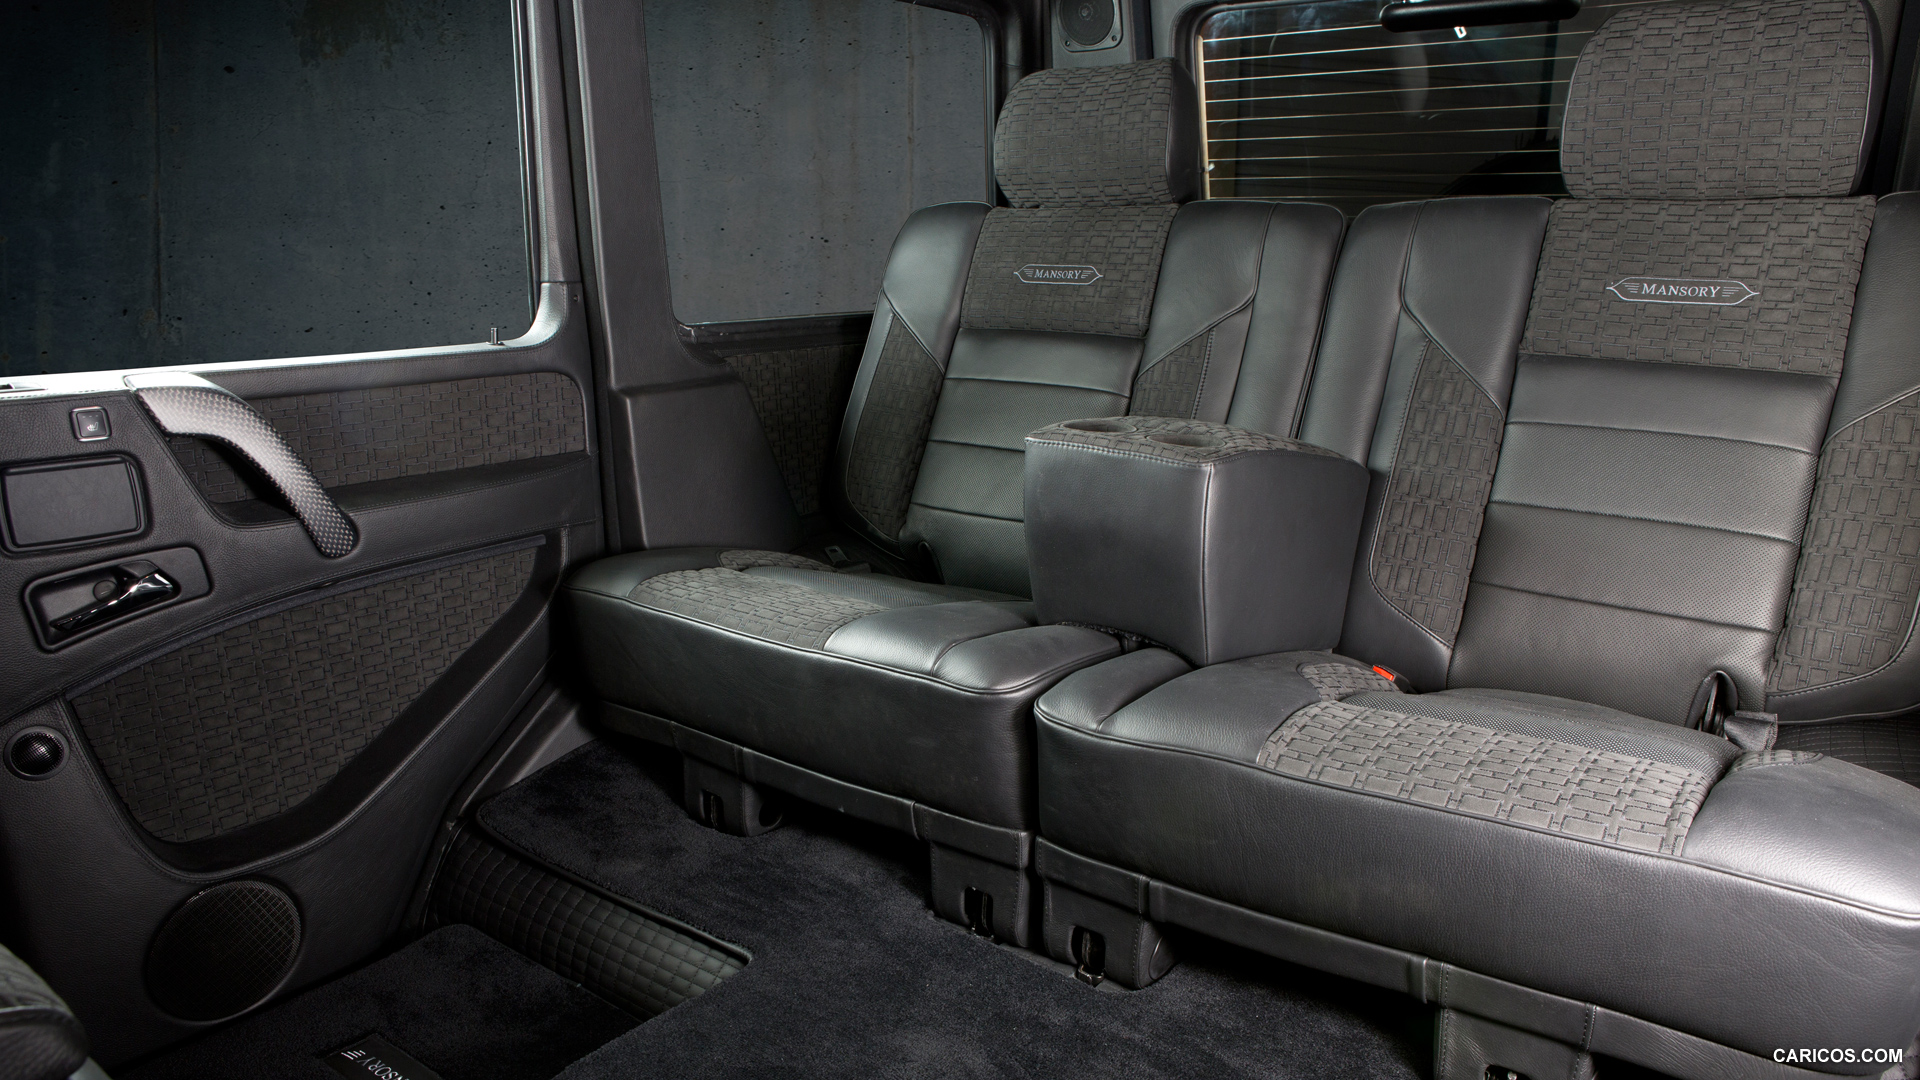 14 Mansory Gronos Based On Mercedes Benz G Class Amg Interior Rear Seats Hd Wallpaper 6